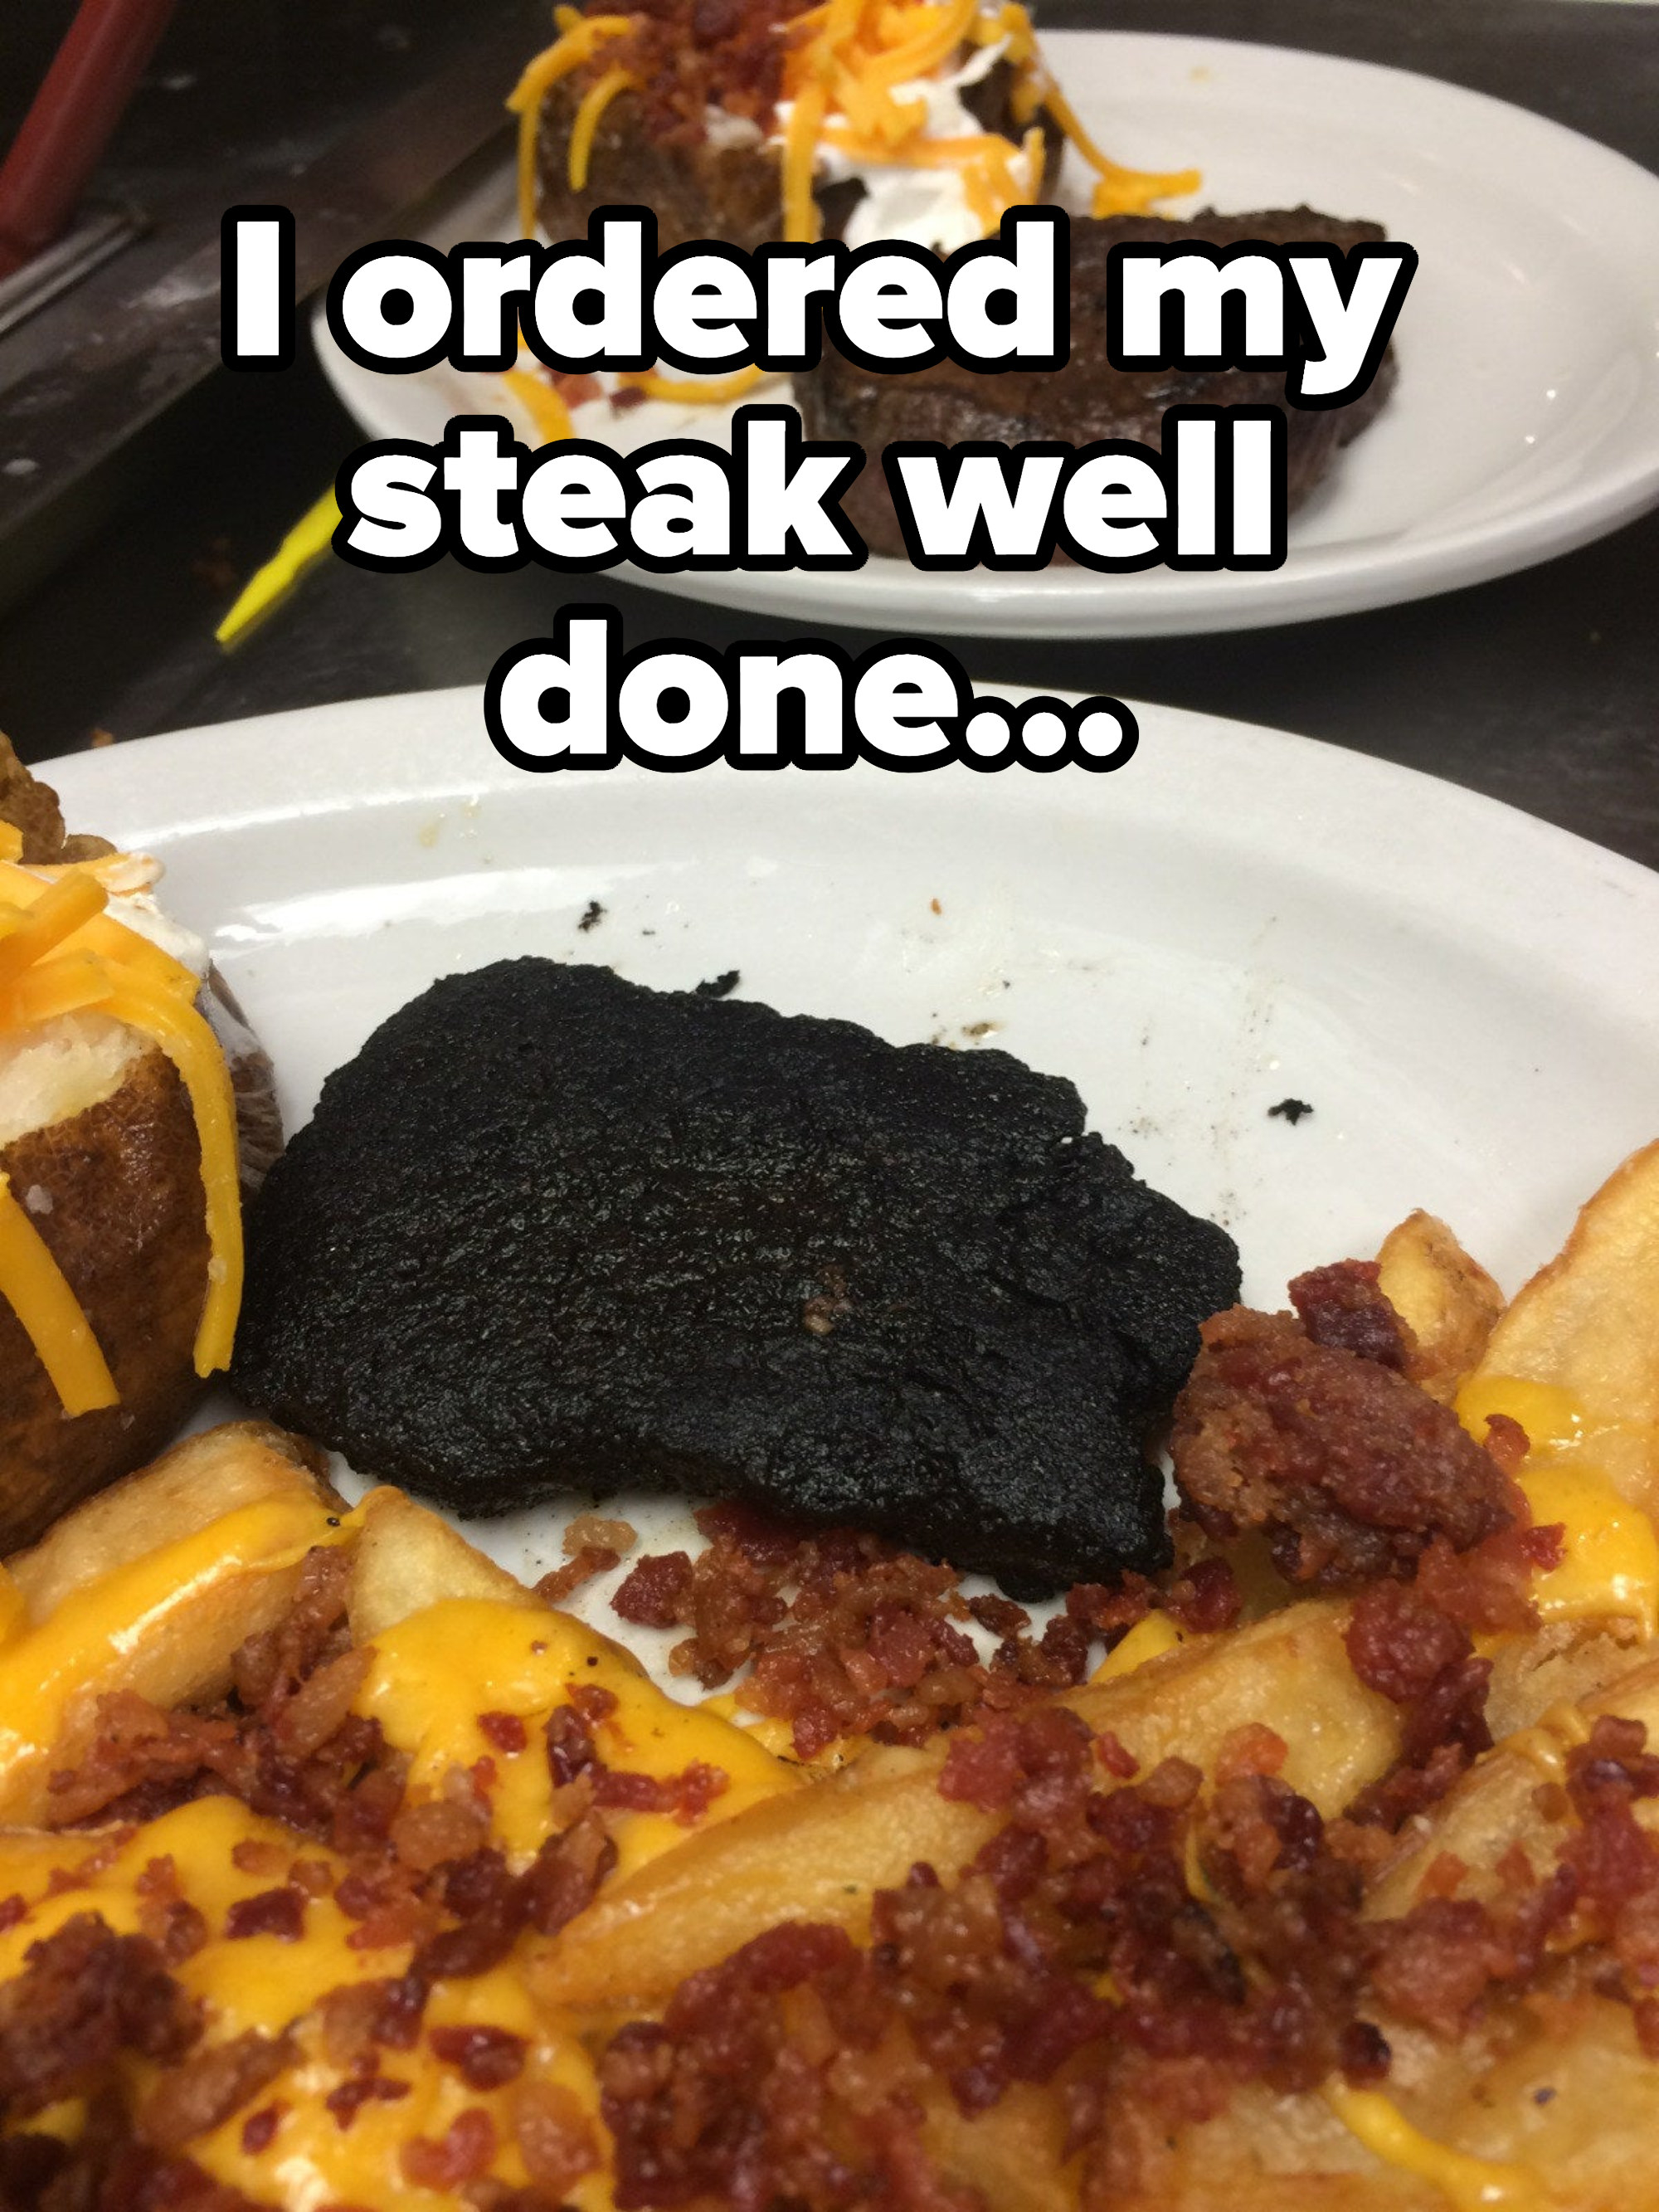 A burnt piece of thin meat alongside cheese on toast and bacon bits